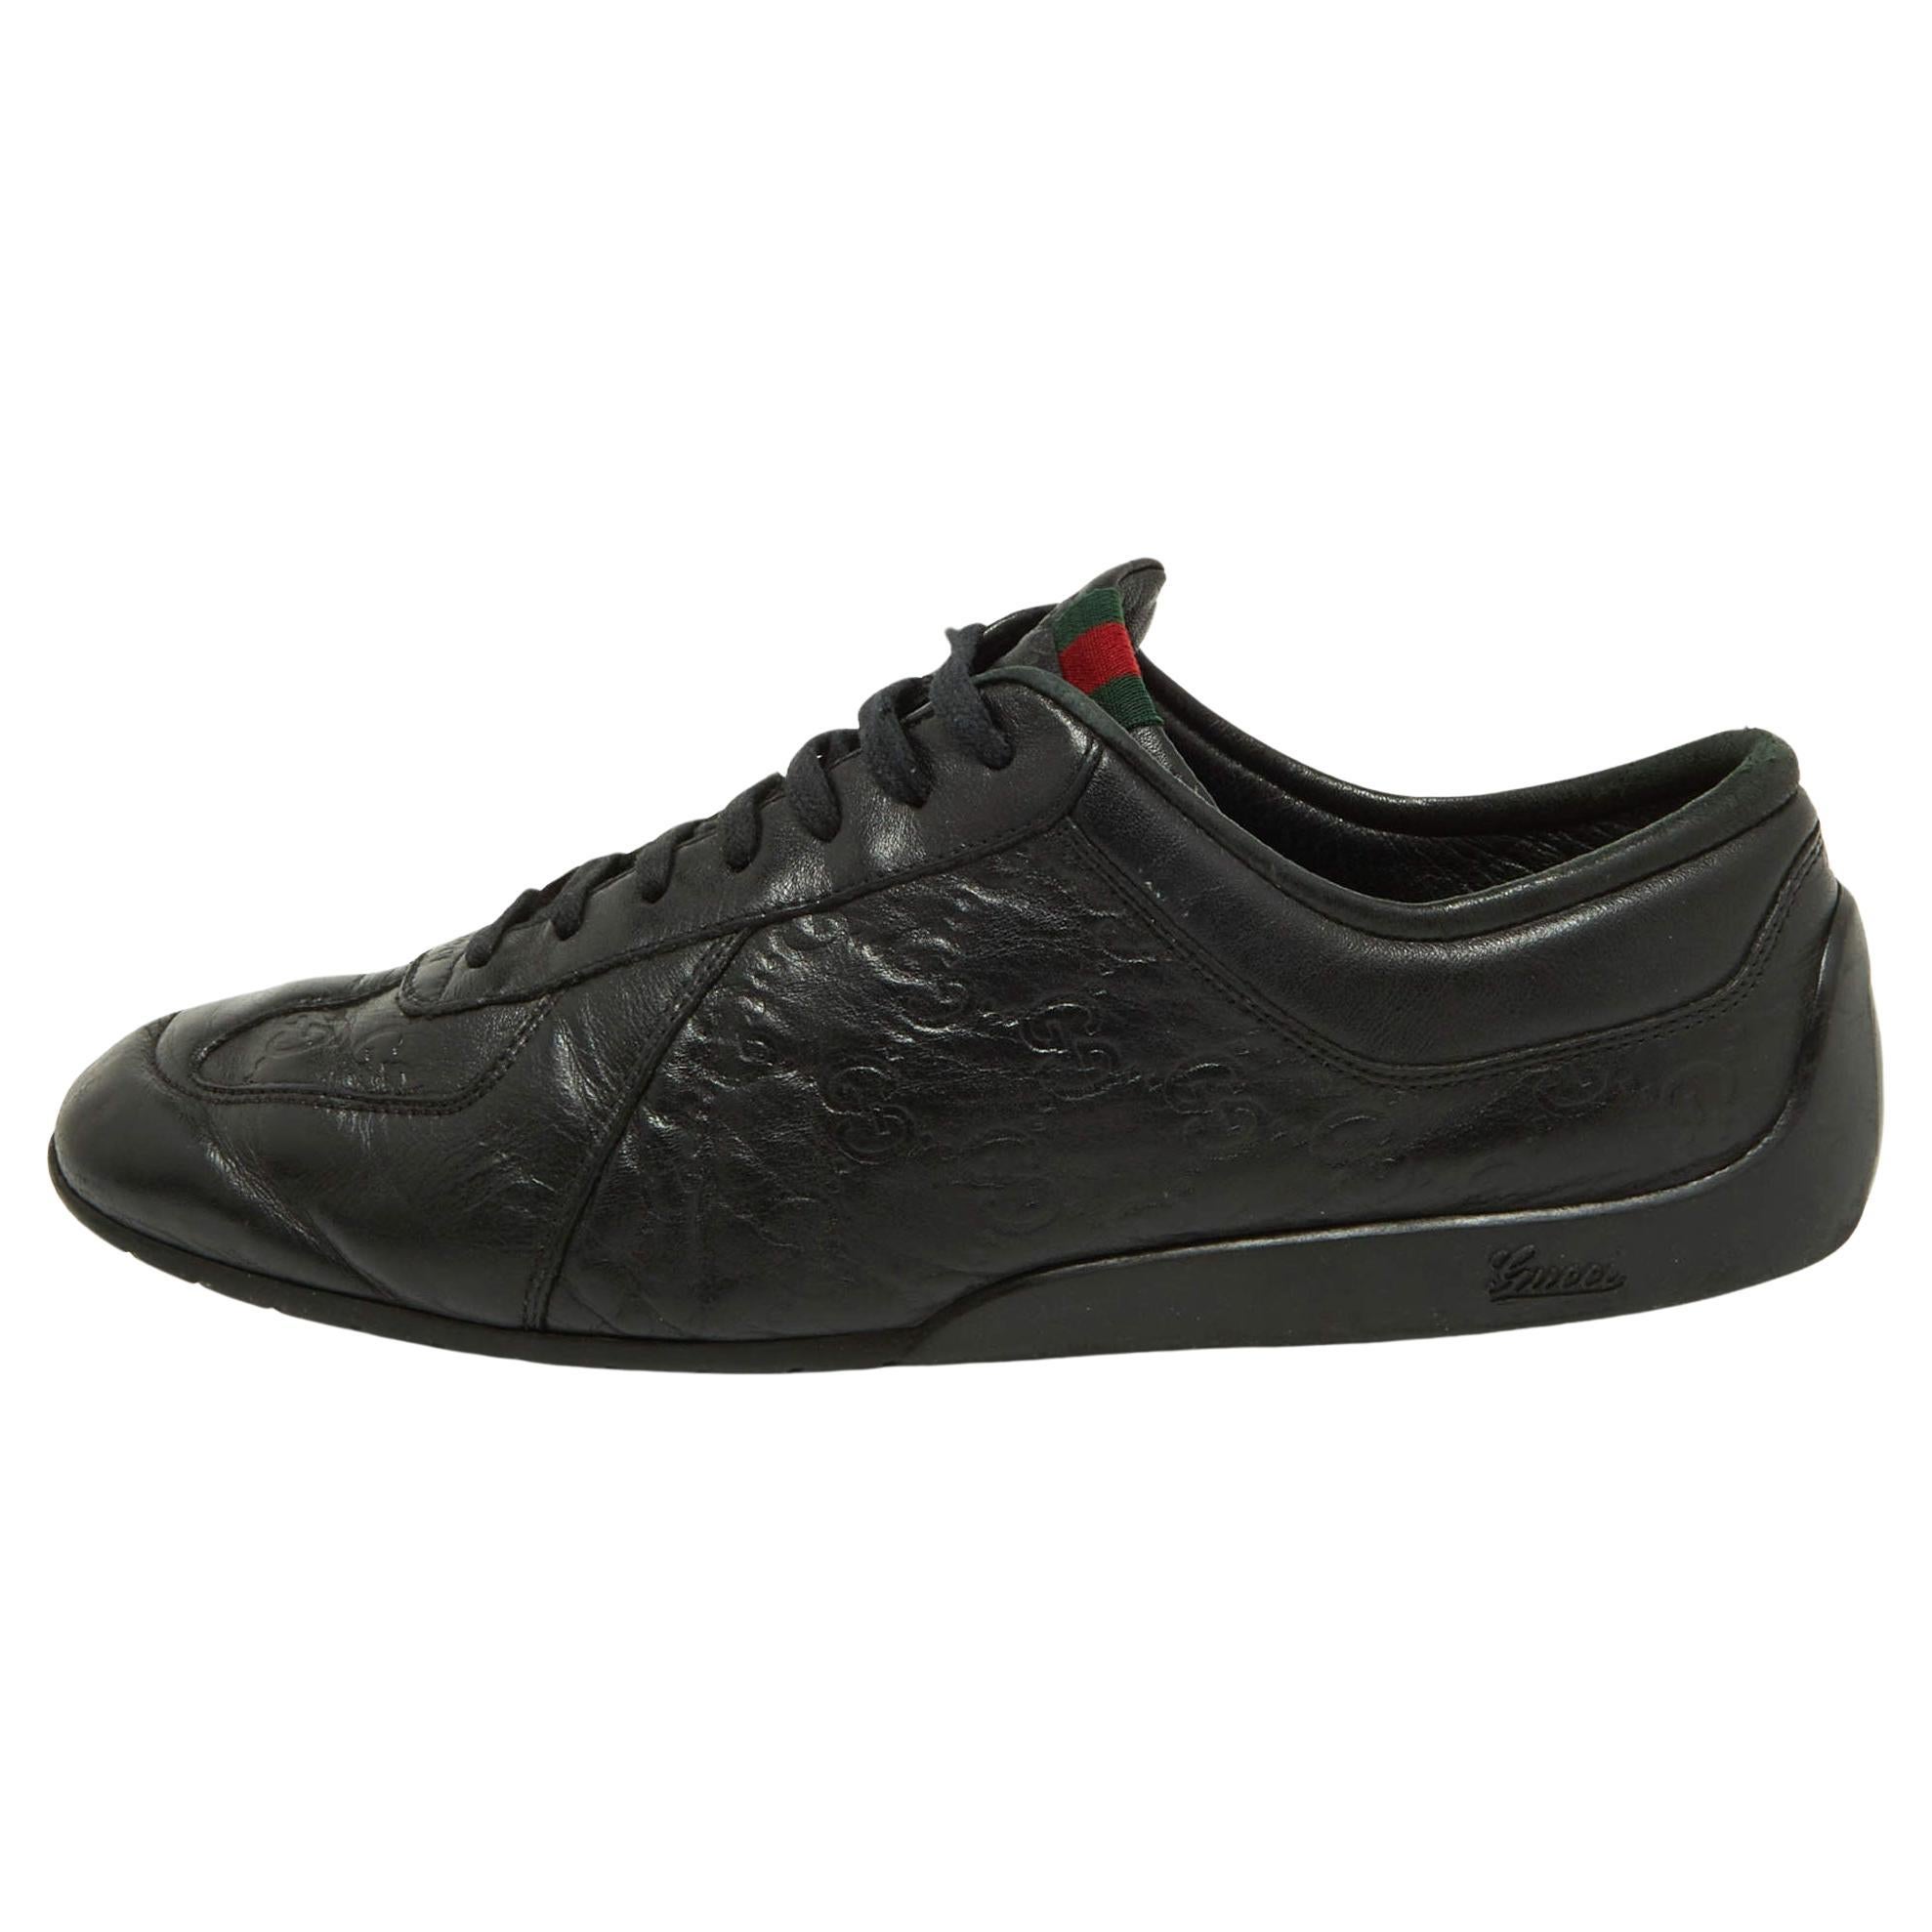 Gucci Black Guccissima Leather Low Top Sneakers Size 44.5 For Sale